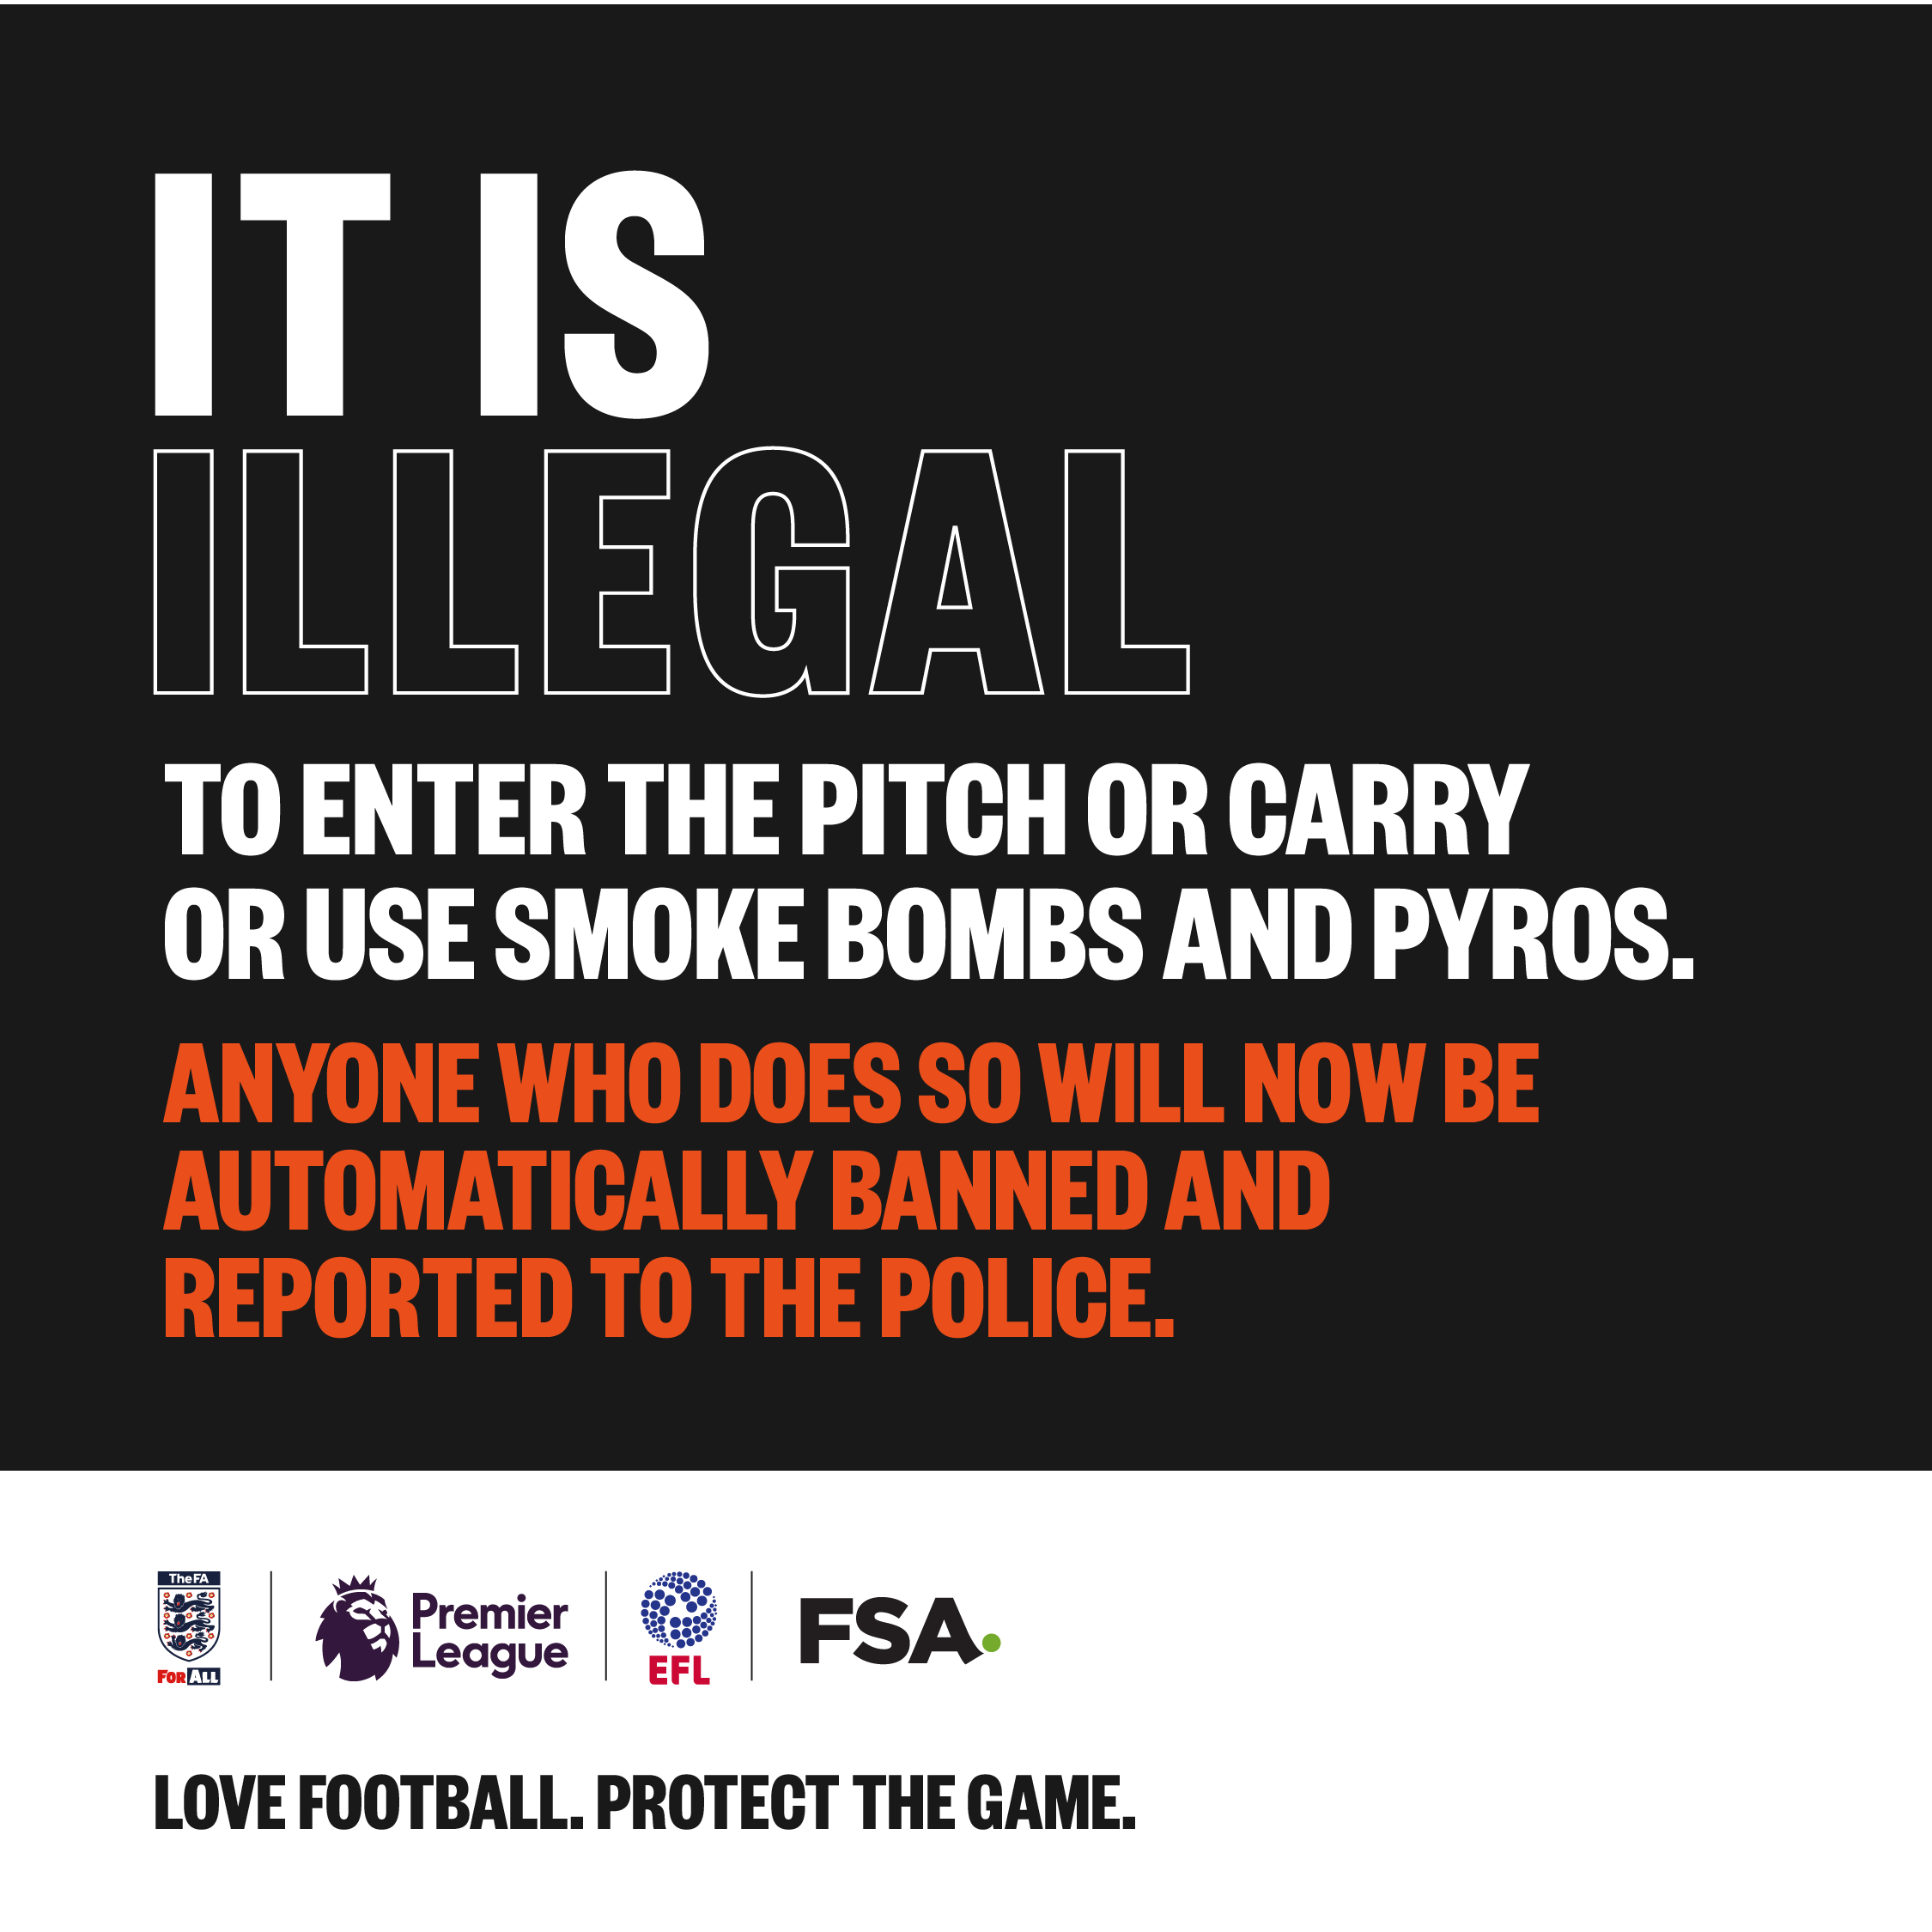 LOVE FOOTBALL. PROTECT THE GAME.